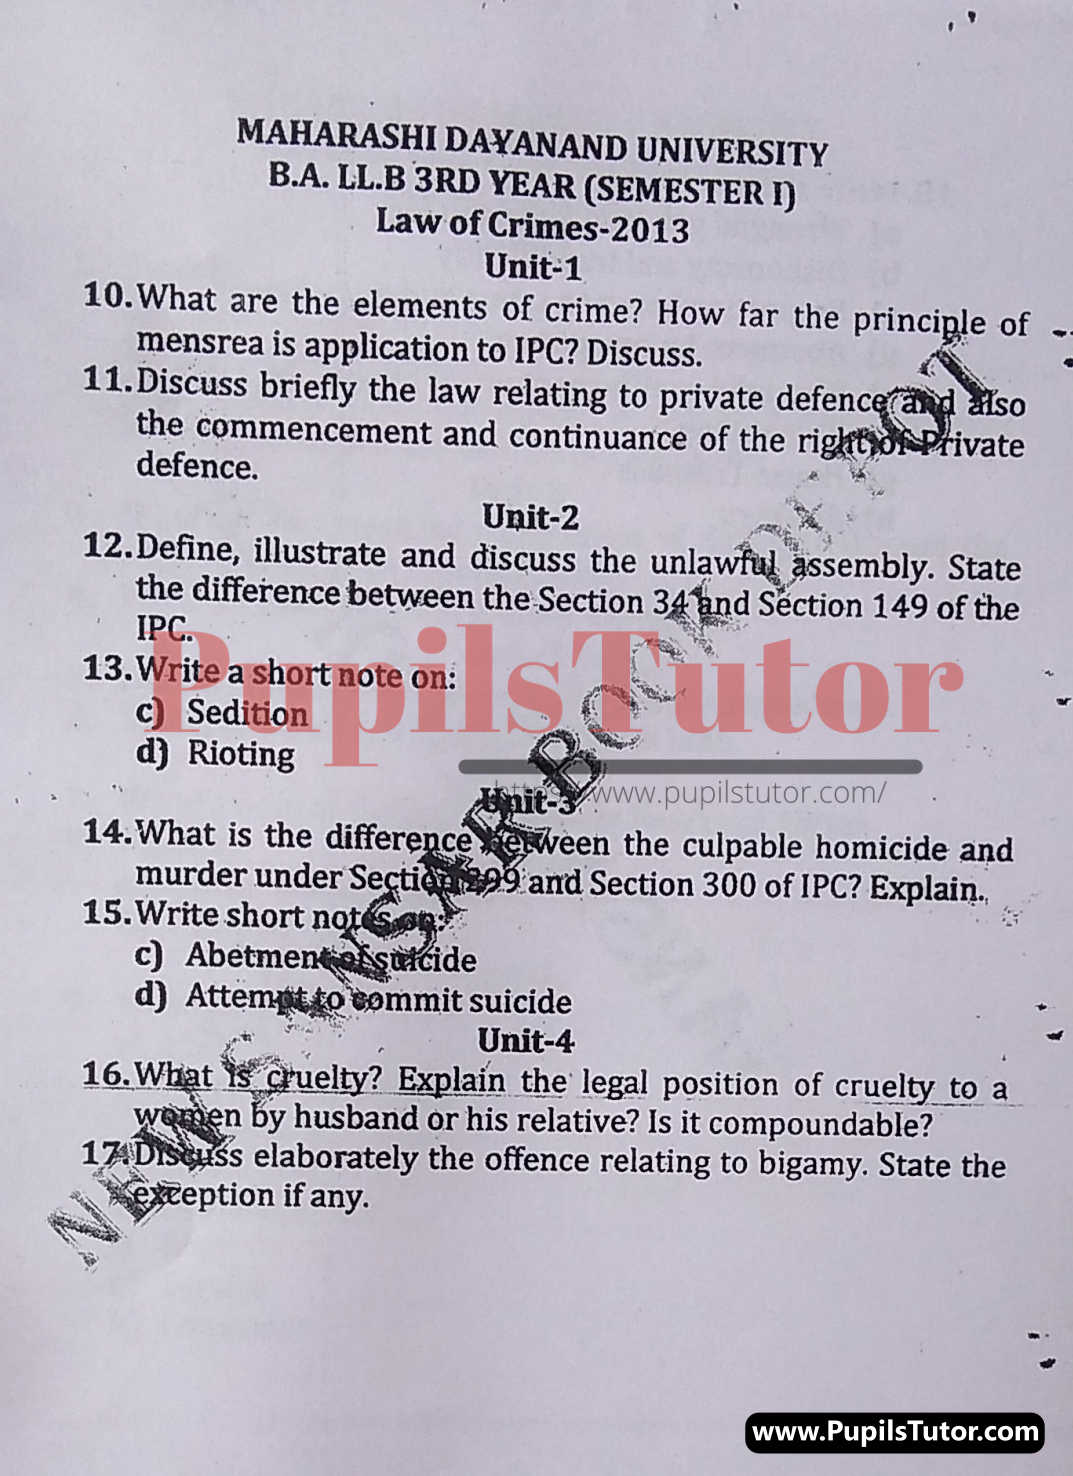 MDU (Maharshi Dayanand University, Rohtak Haryana) LLB Regular Exam (Hons.) First Semester Previous Year Law Of Crimes Question Paper For 2013 Exam (Question Paper Page 1) - pupilstutor.com